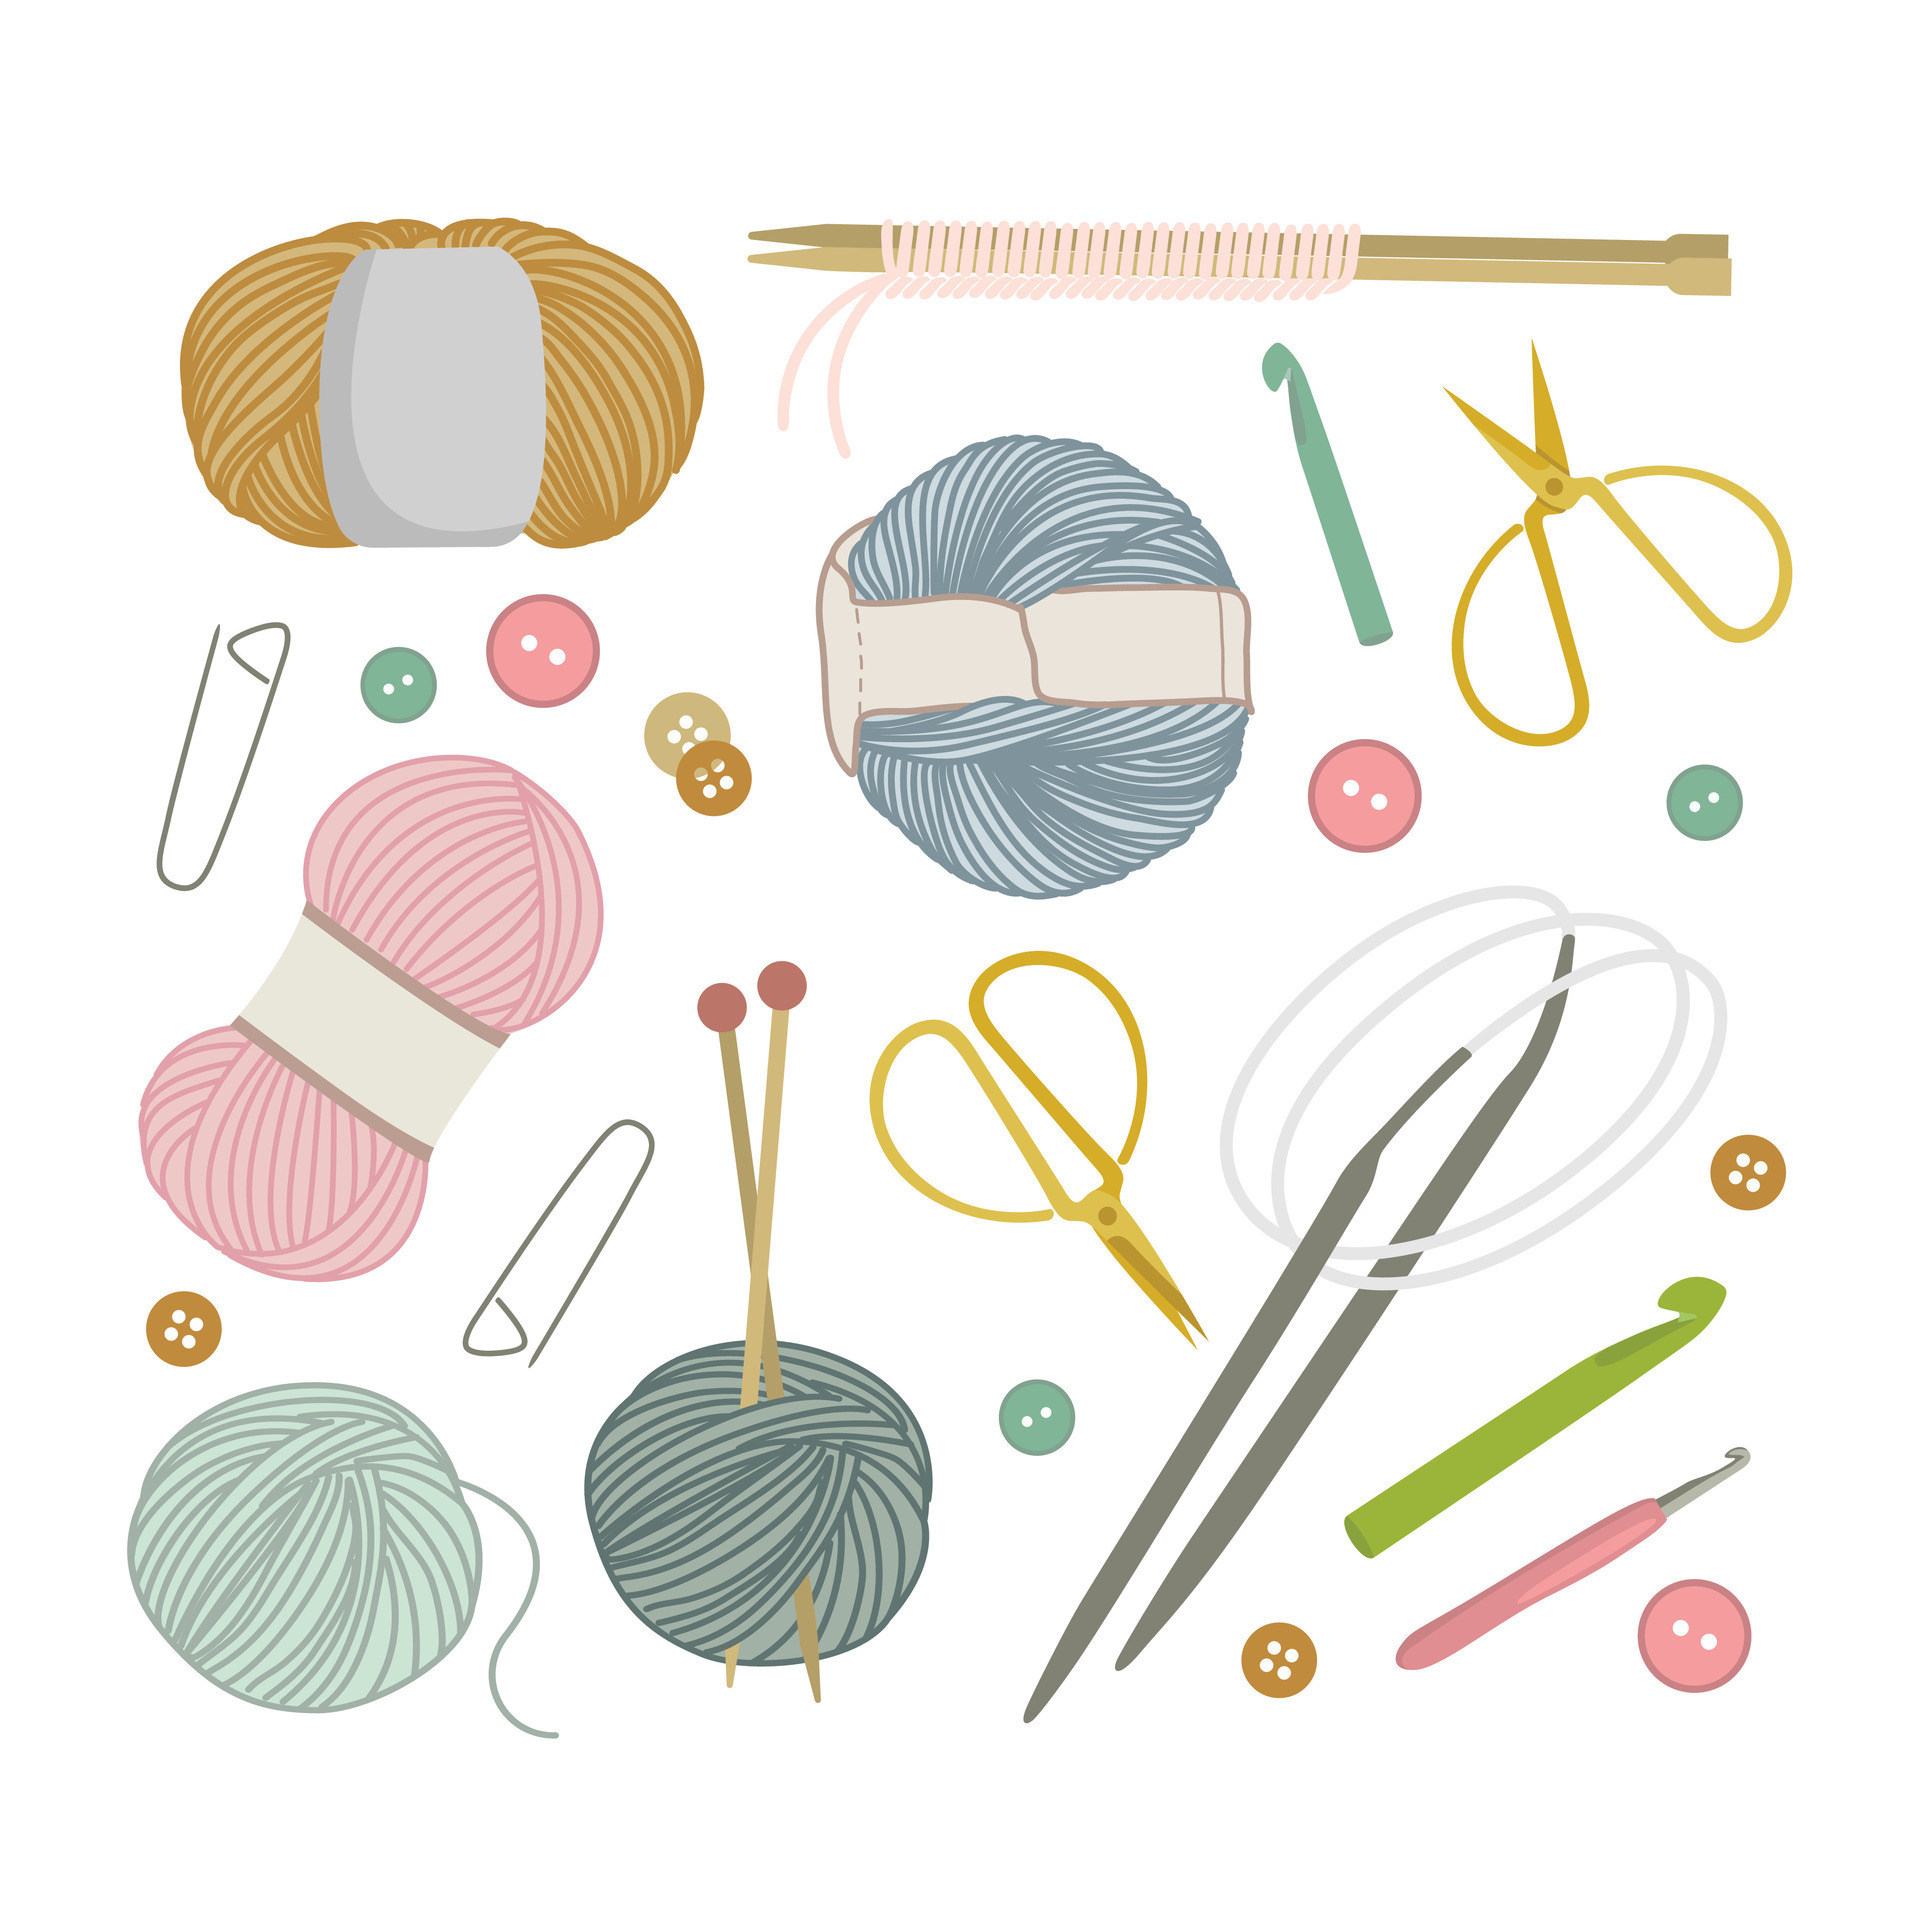 https://static.vecteezy.com/system/resources/previews/025/948/387/original/a-set-of-various-crochet-and-knitting-tools-color-flat-illustration-isolated-on-white-background-knitting-scissors-pins-crochet-hooks-knitting-needles-and-skeins-of-thread-vector.jpg